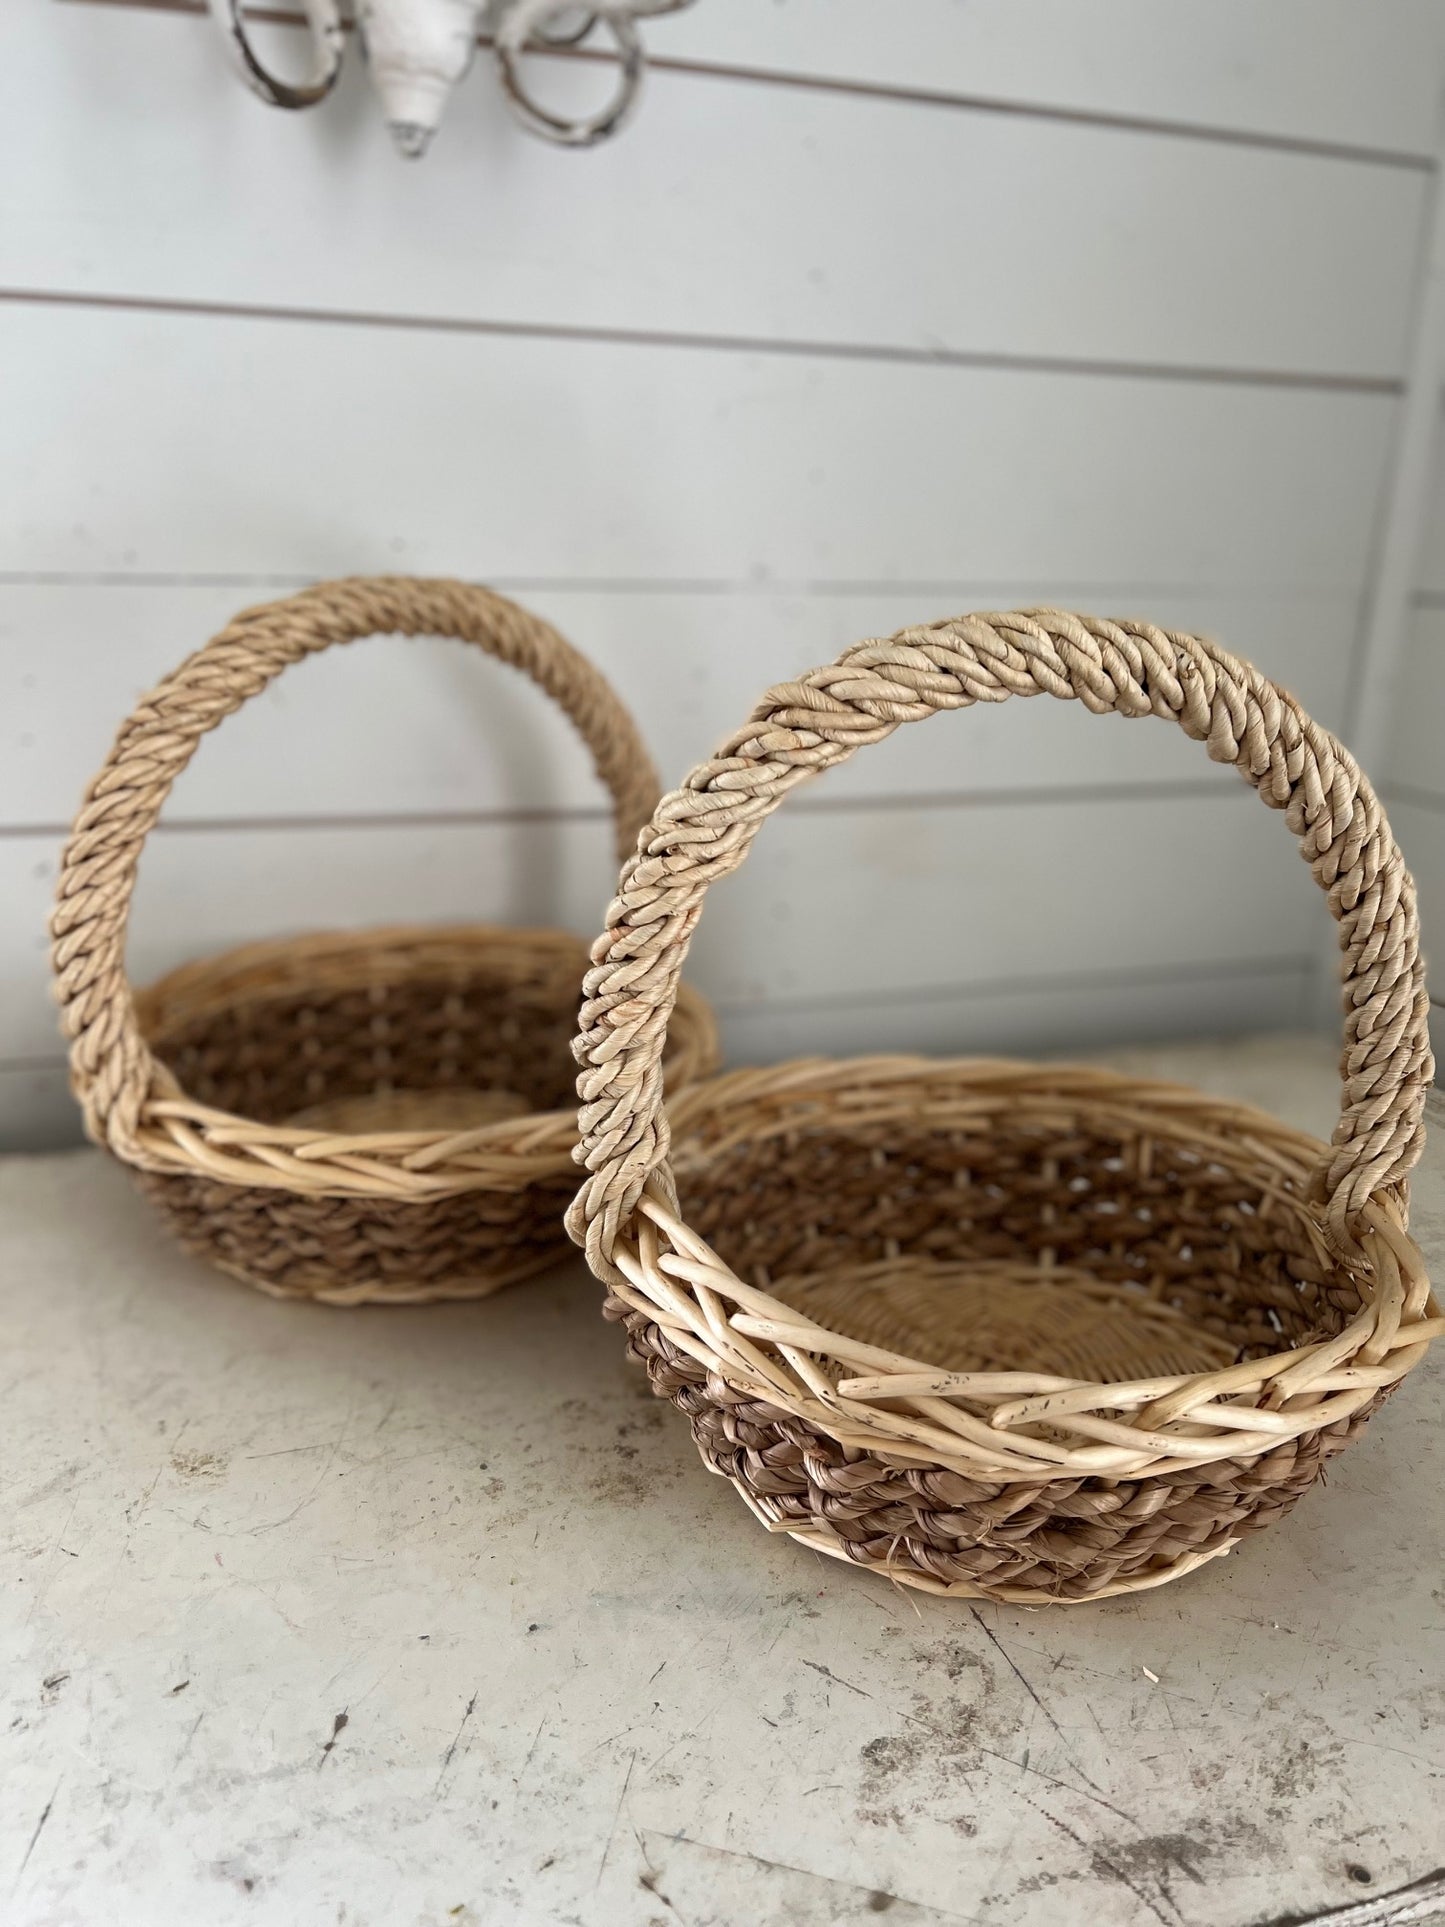 Set of round baskets with braided handle